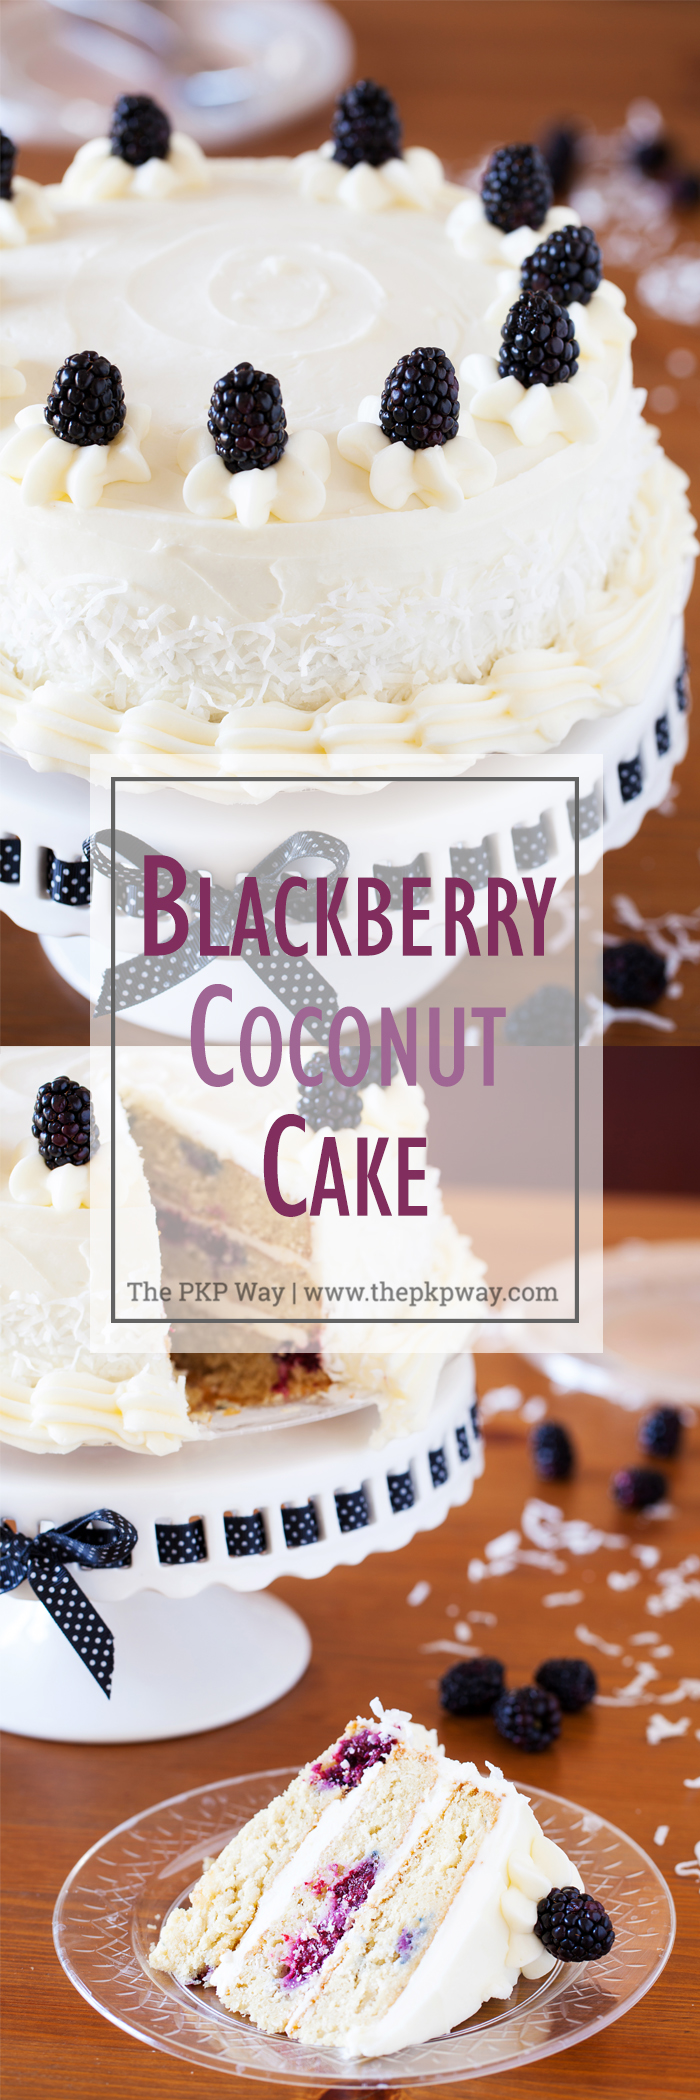 A cake for all occasions, this Blackberry Coconut Cake has a dense and moist crumb of blackberries and coconut, is filled with rich coconut buttercream, and frosted with tangy cream cheese frosting. Perfect for berry and coconut lovers everywhere. 